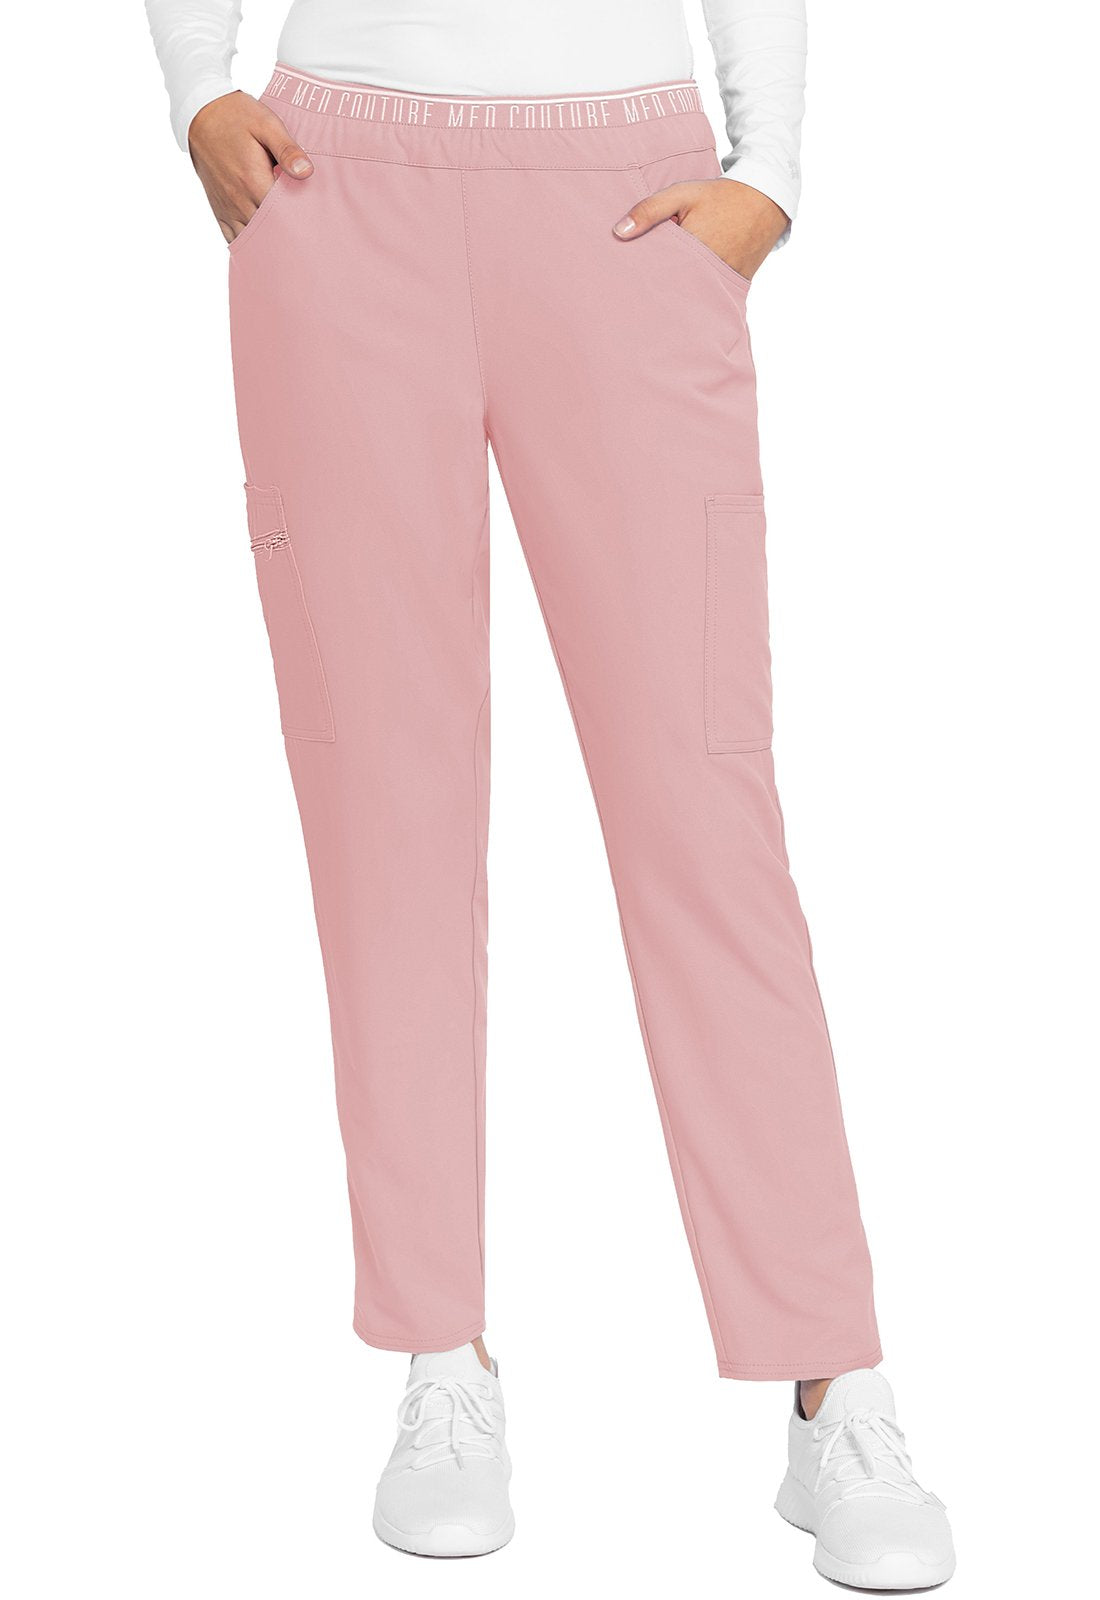 Med Couture MC Insight Perfectly Pink / L MC Insight Tall Mid-rise Tapered Leg Pull-on Scrub Pant MC009T